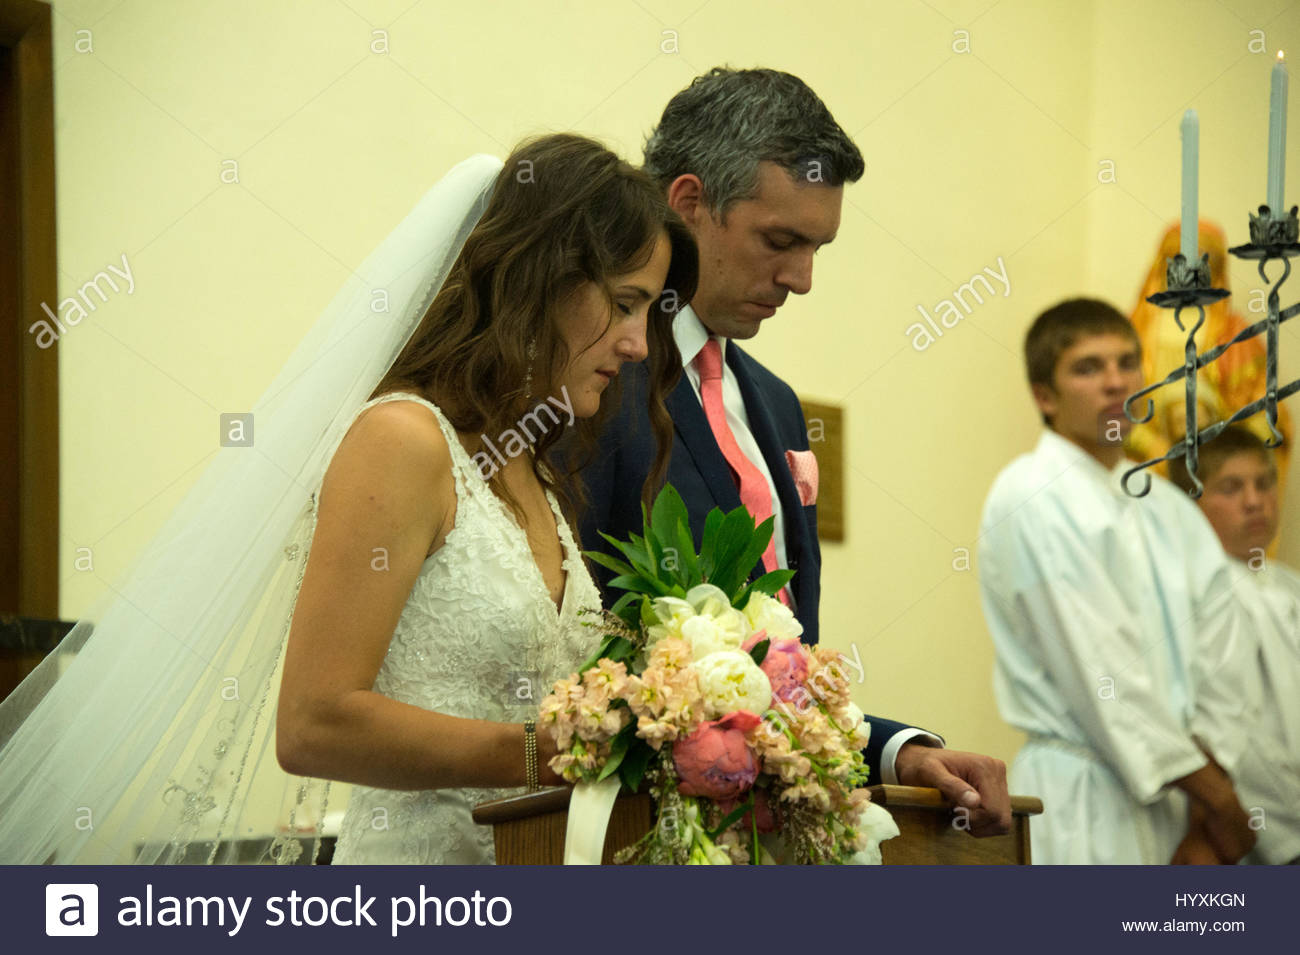 Bride And Groom Kneeling At Altar During Wedding Ceremony Stock